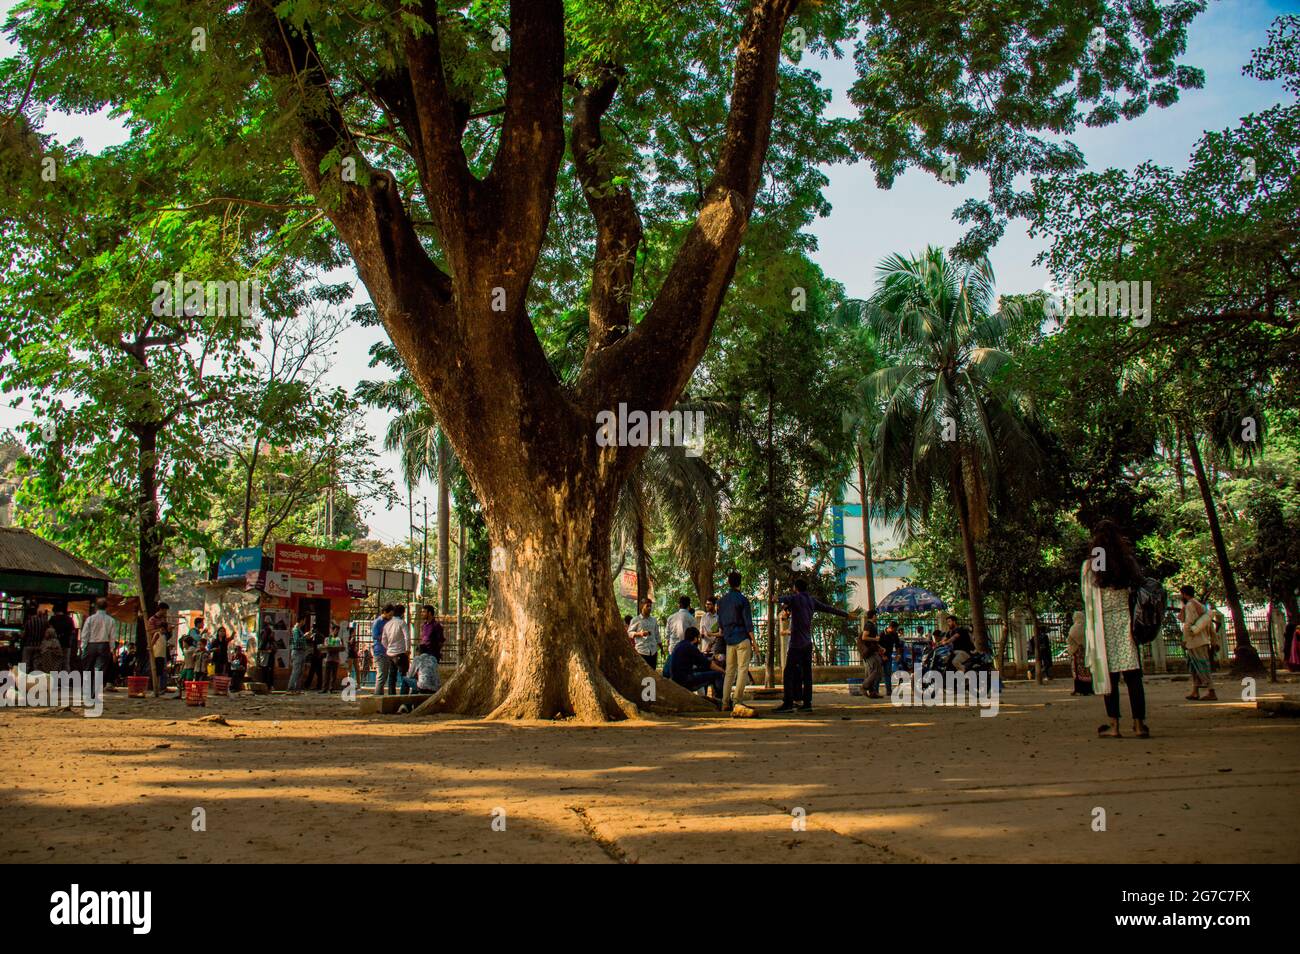 Hakim chattar campus of Dhaka university.This very significant place for students. Stock Photo